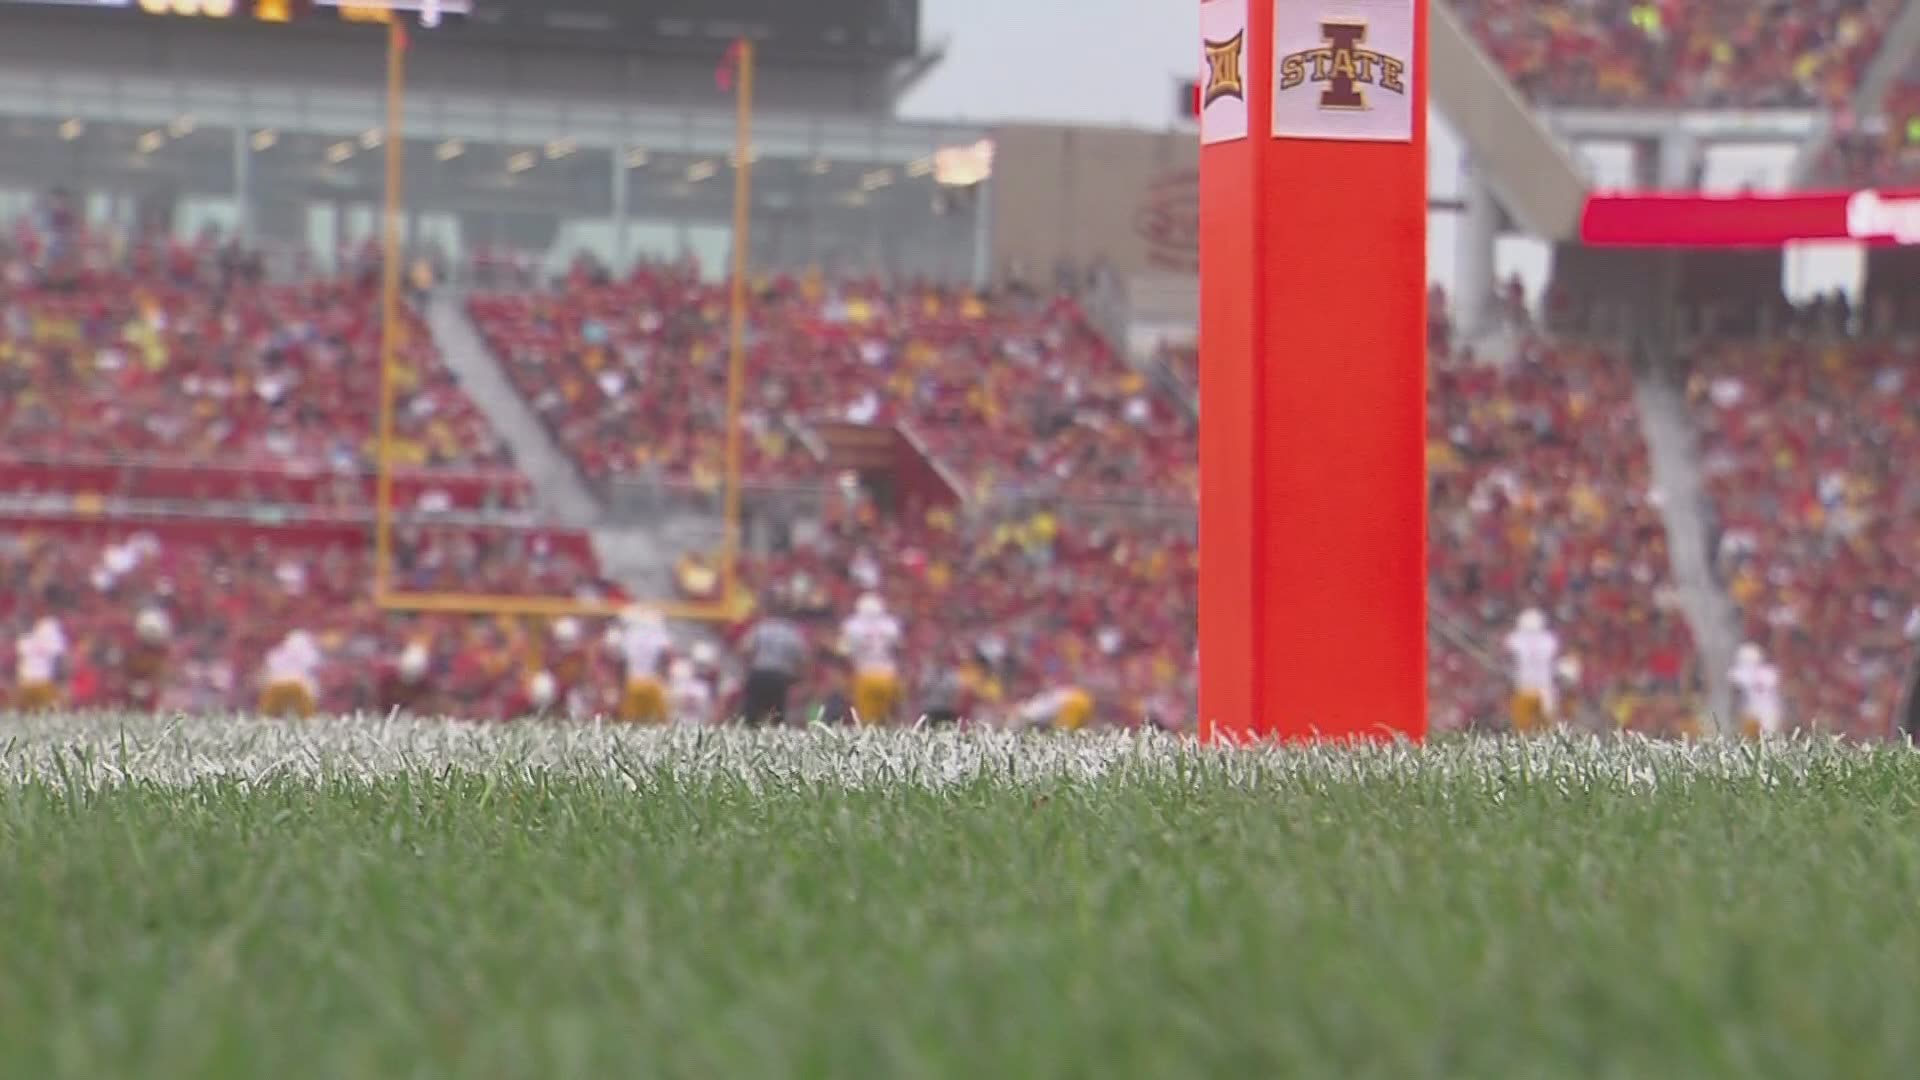 Jack Trice Stadium to open, but with restrictions